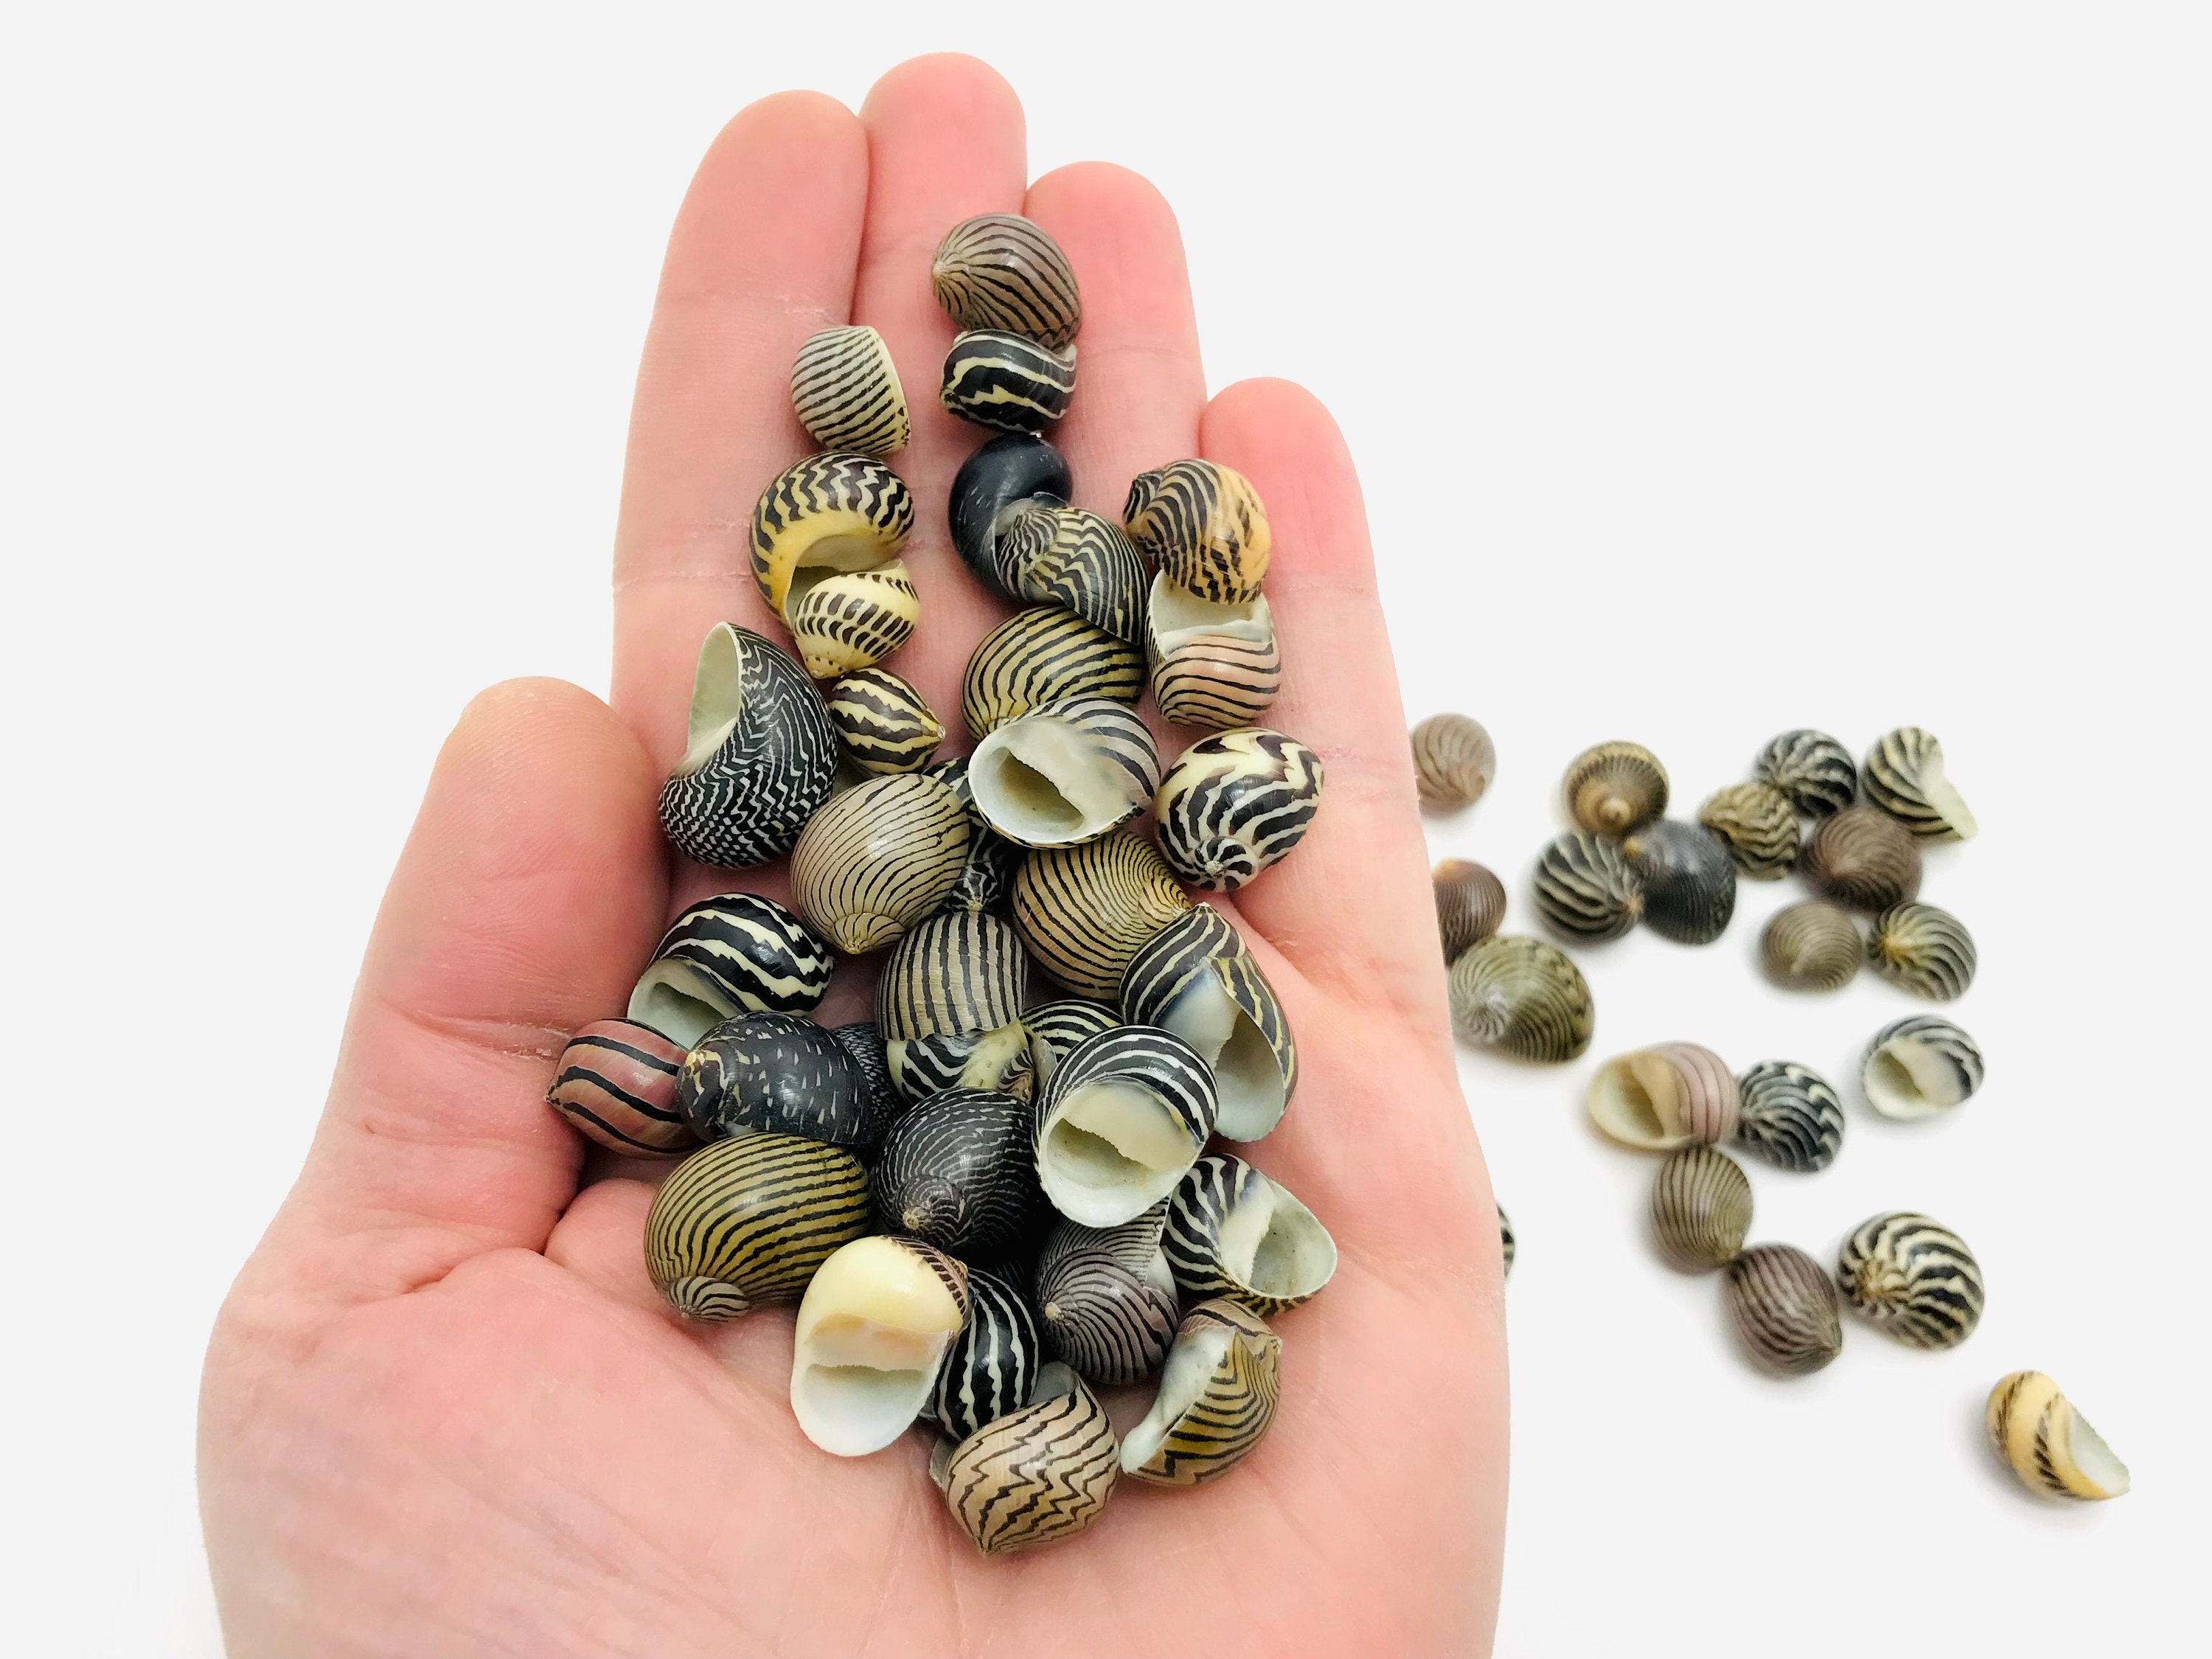 Small Striped Shells, Neritina, Curiosity Leisure, Zebra Etsy Collectible Cabinet, Shells Nerite Creative Shell, Shell - for